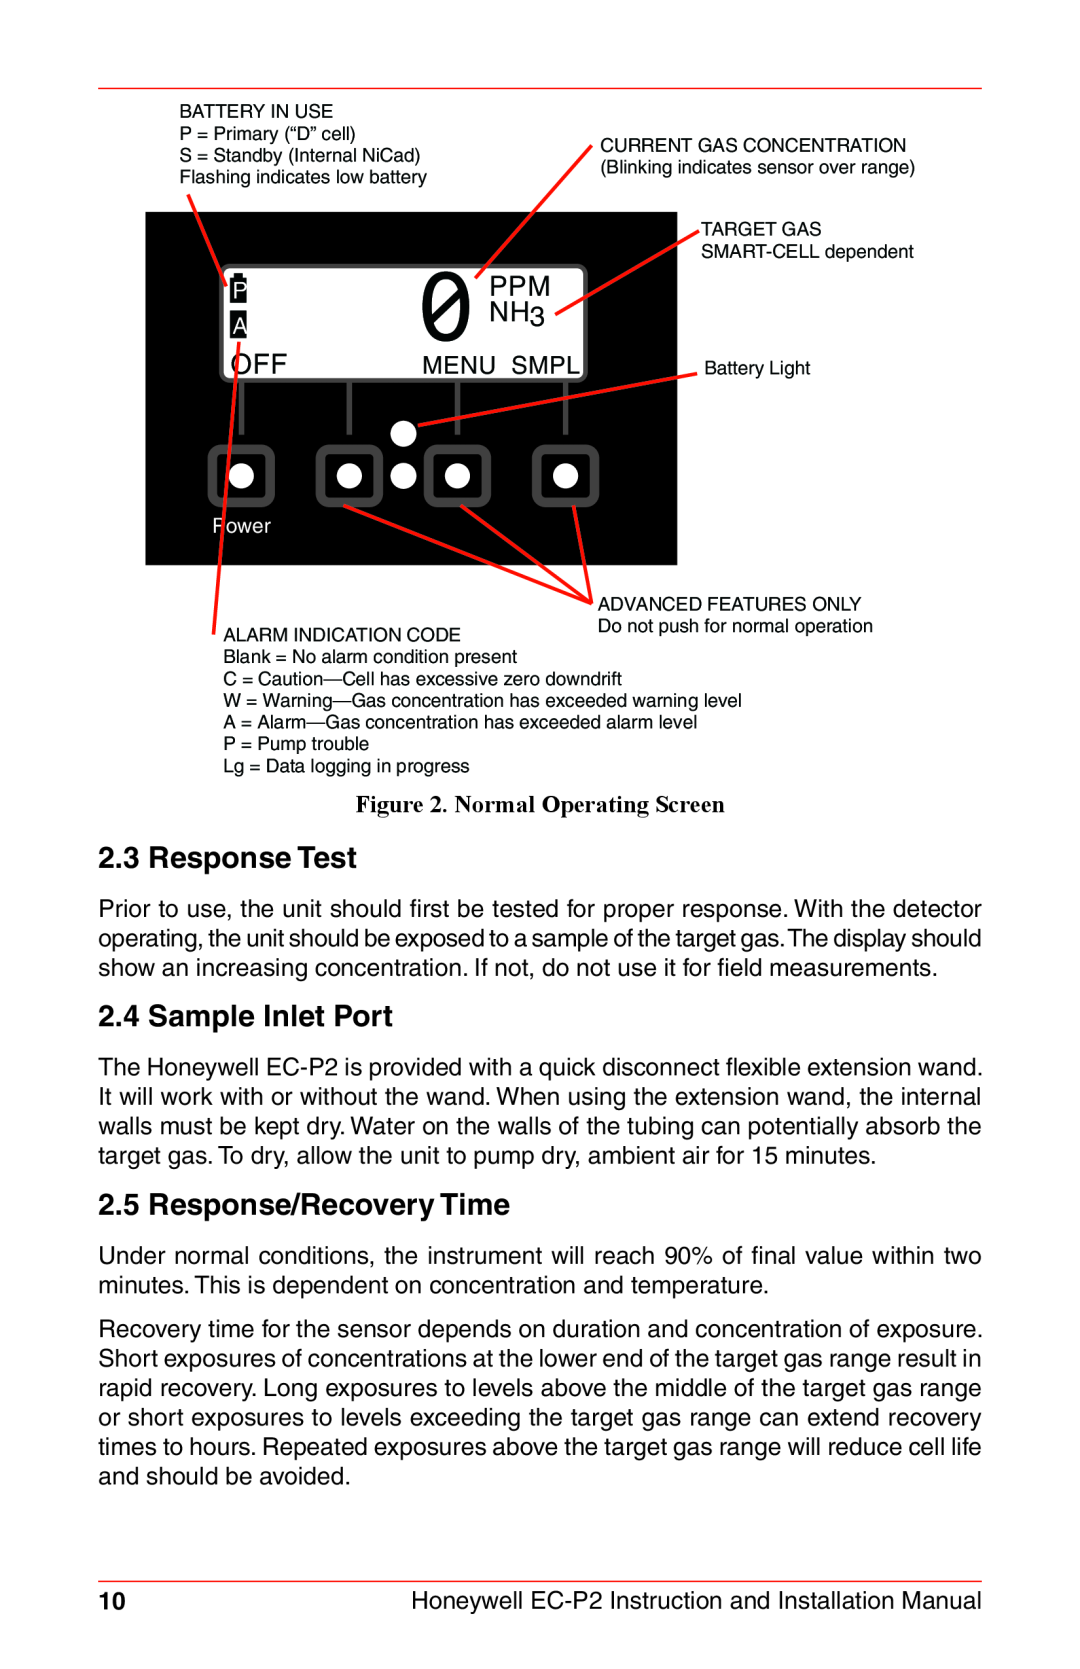 Honeywell EC-P2 instruction manual Response Test, Sample Inlet Port, Response/Recovery Time, Normal Operating Screen 